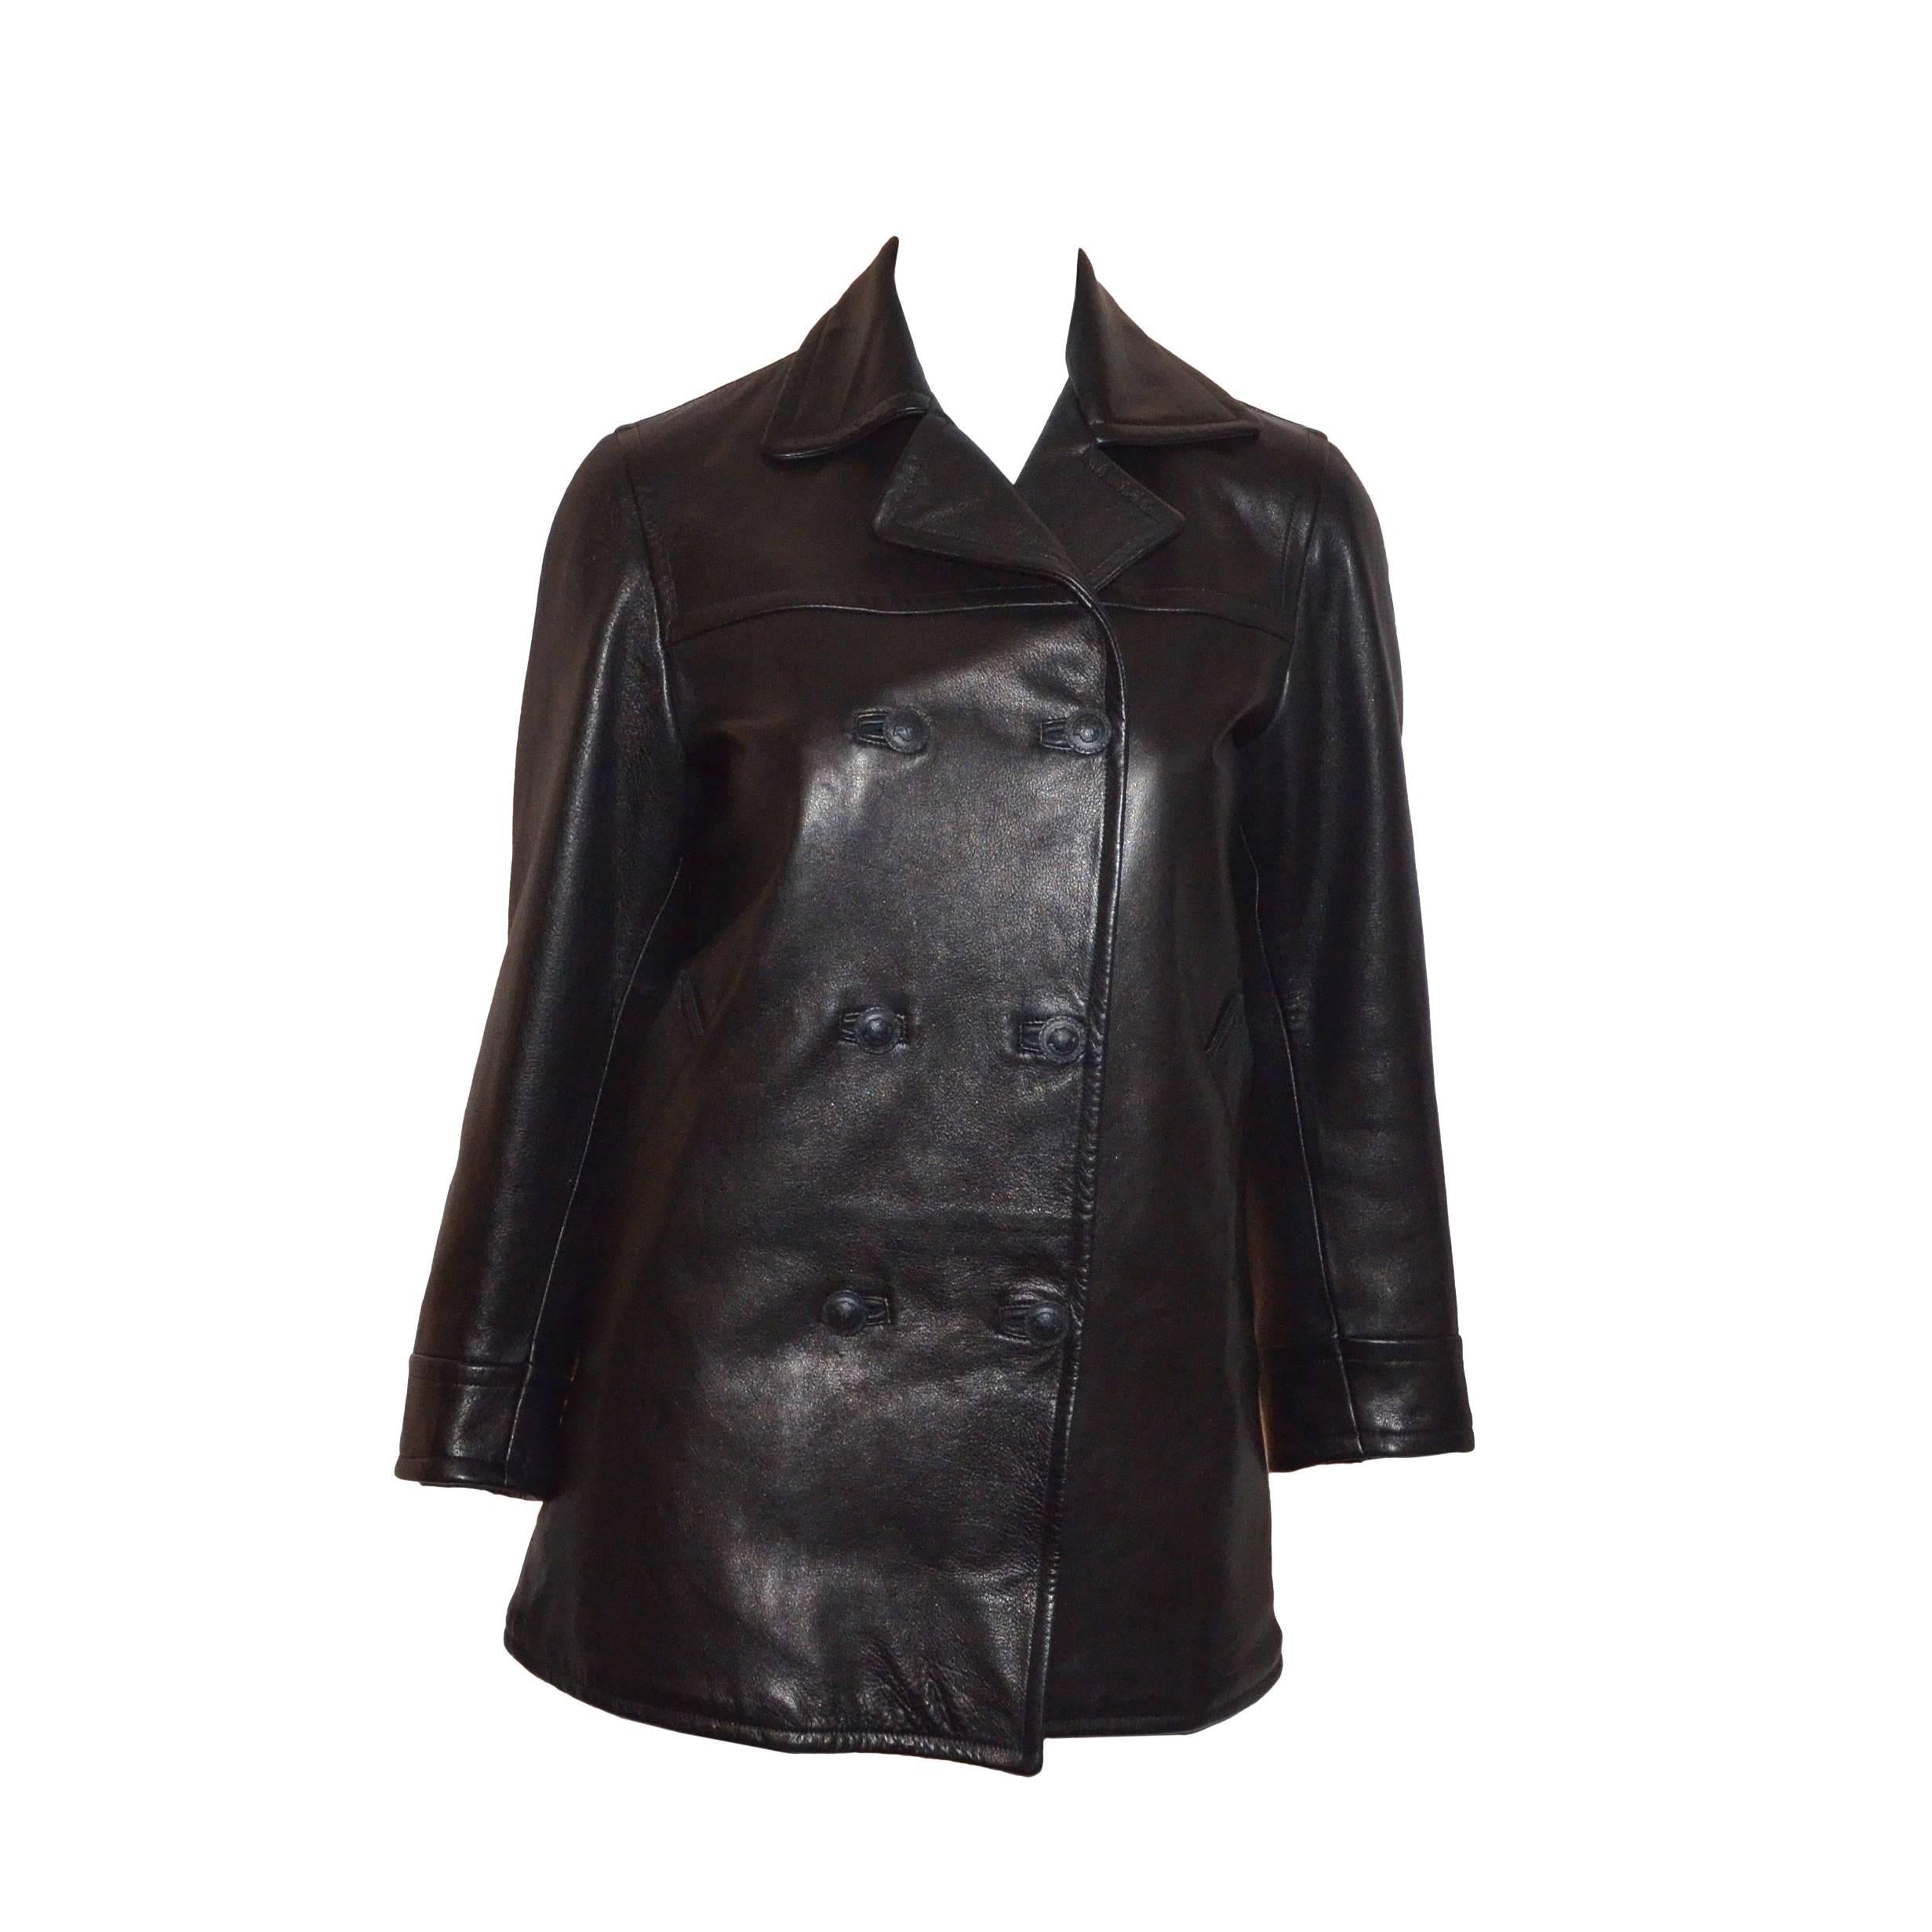 Gianni Versace Leather Pea Coat with Medusa Buttons